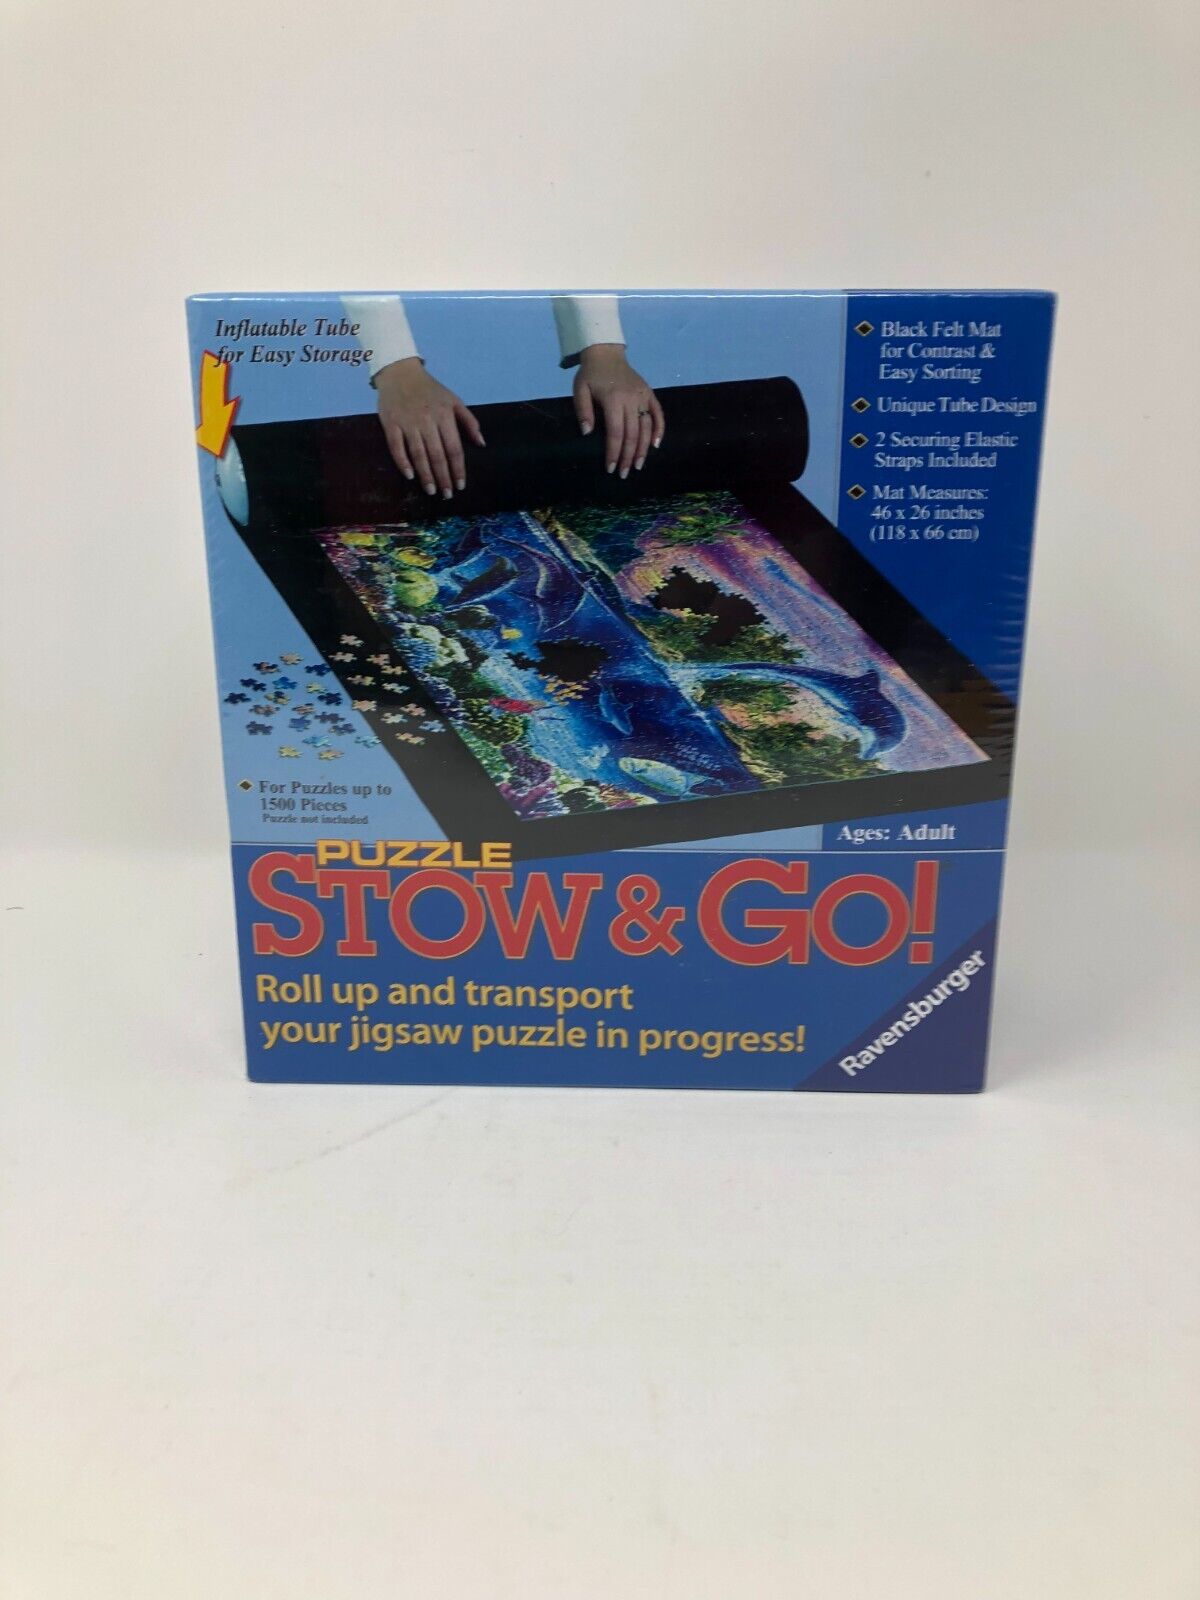 Ravensburger Puzzle Stow And Go Storage Roll up Mat 1500 Pcs 46x26 Inches Sealed